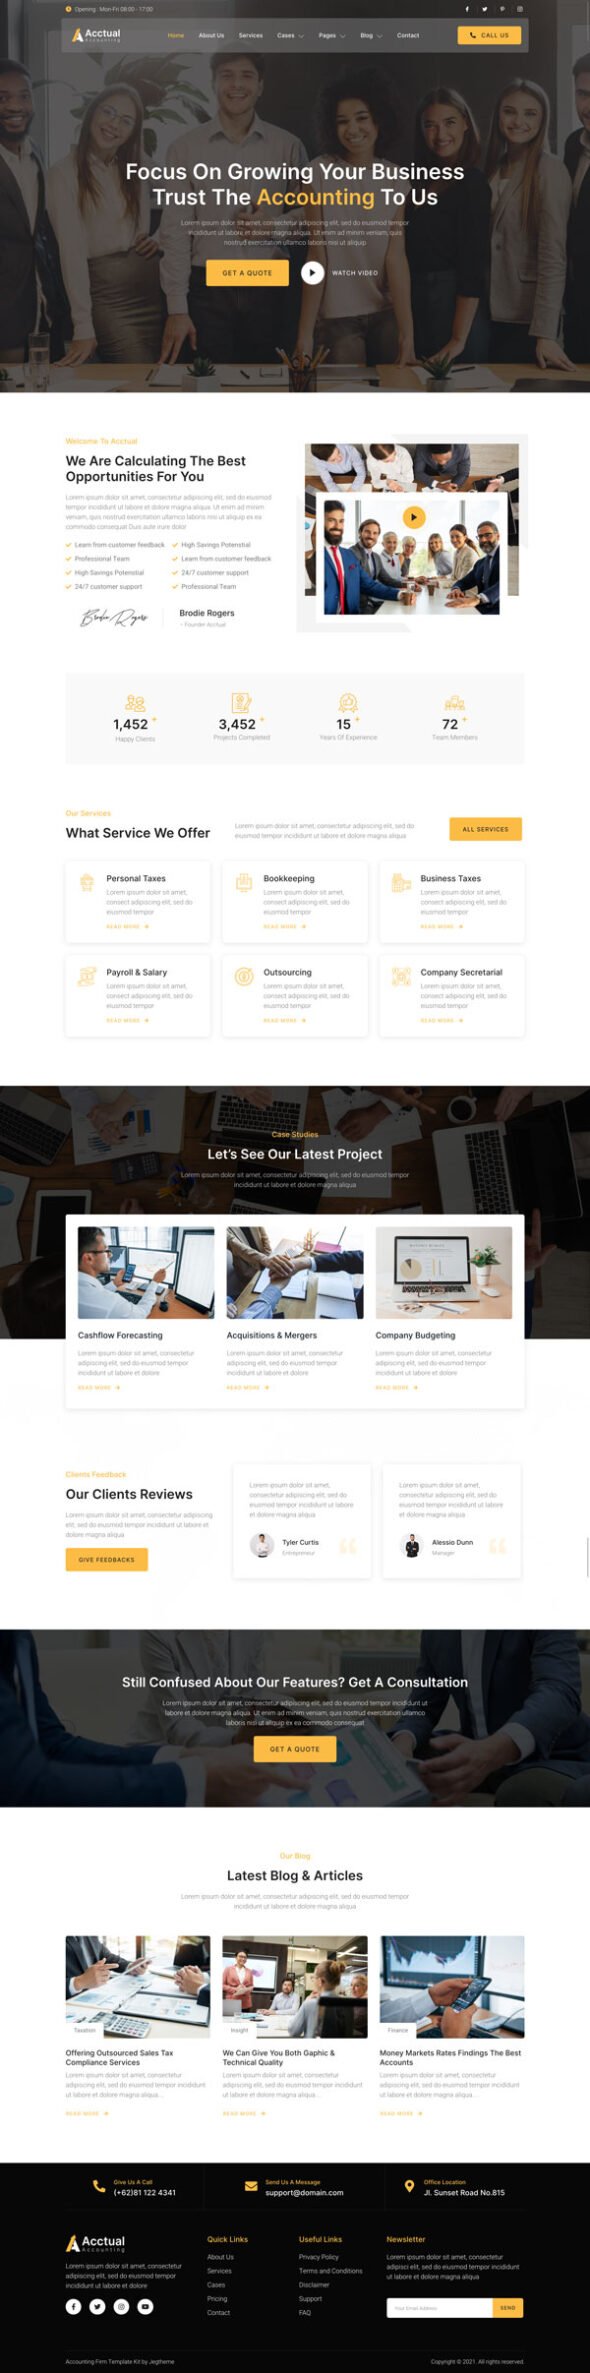 Acctual – Accounting Firm Elementor Template Kit